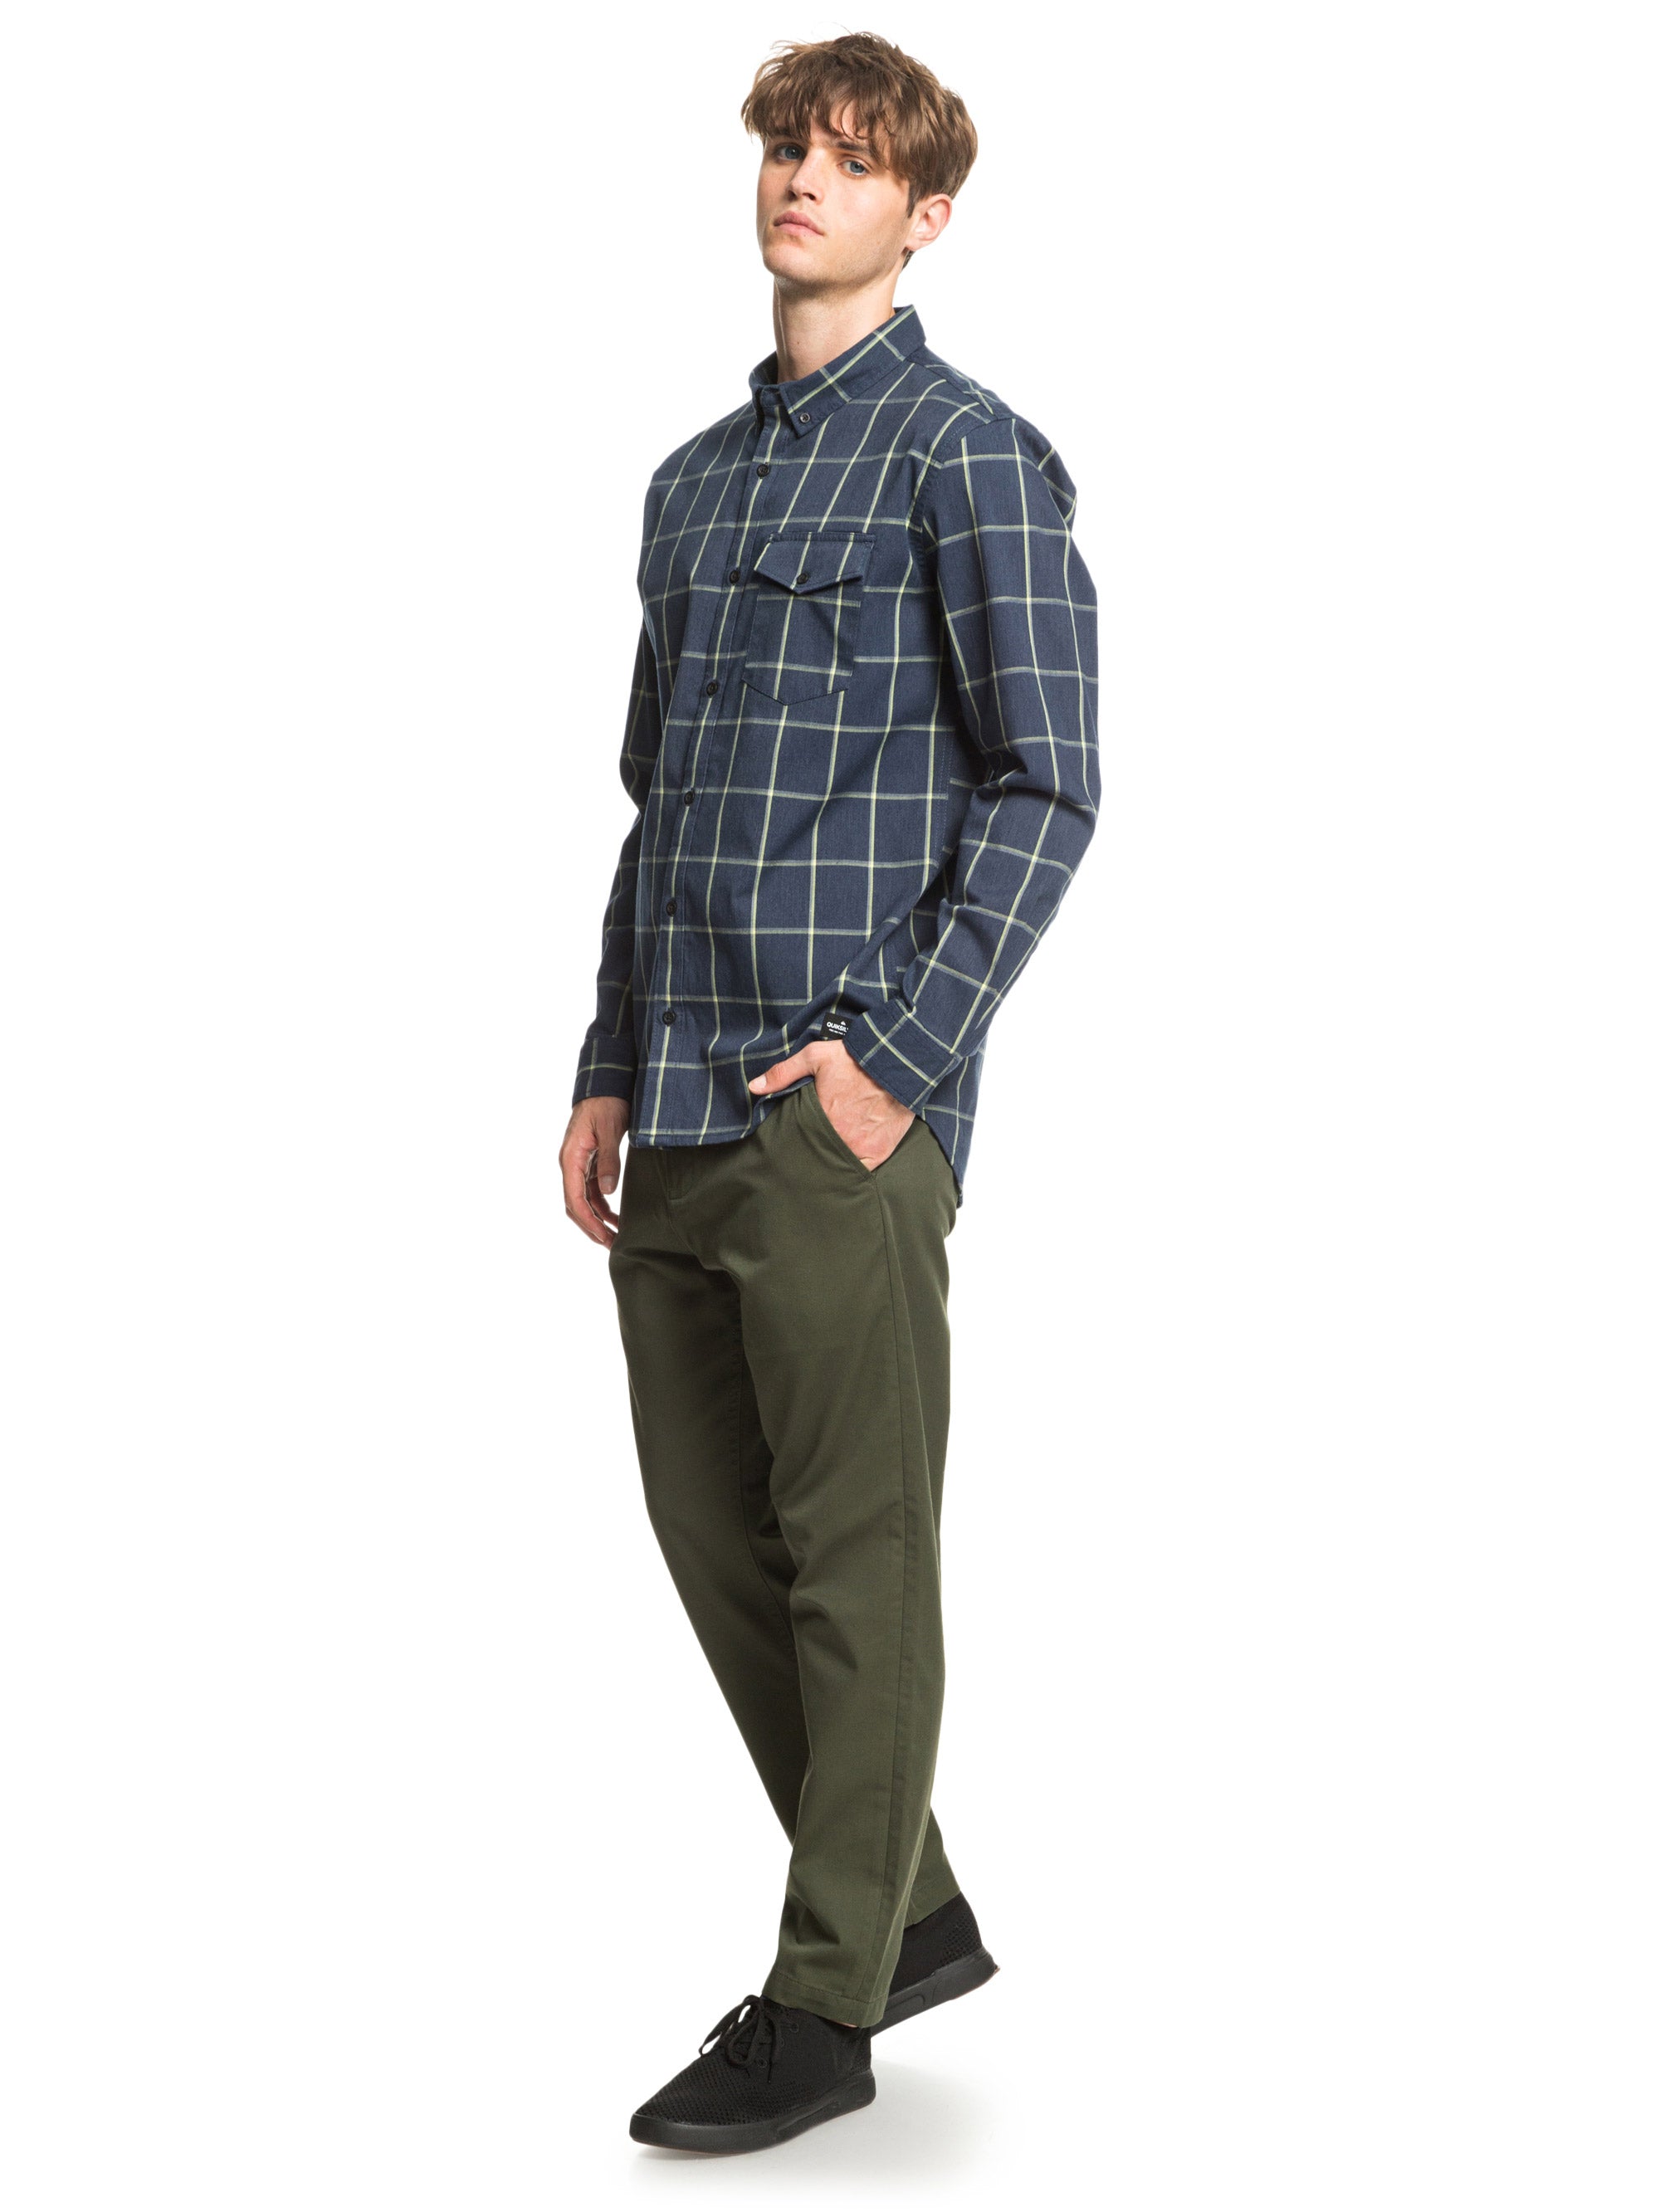 MISTY HEIGHTS LONGSLEEVE CHECKED SHIRT